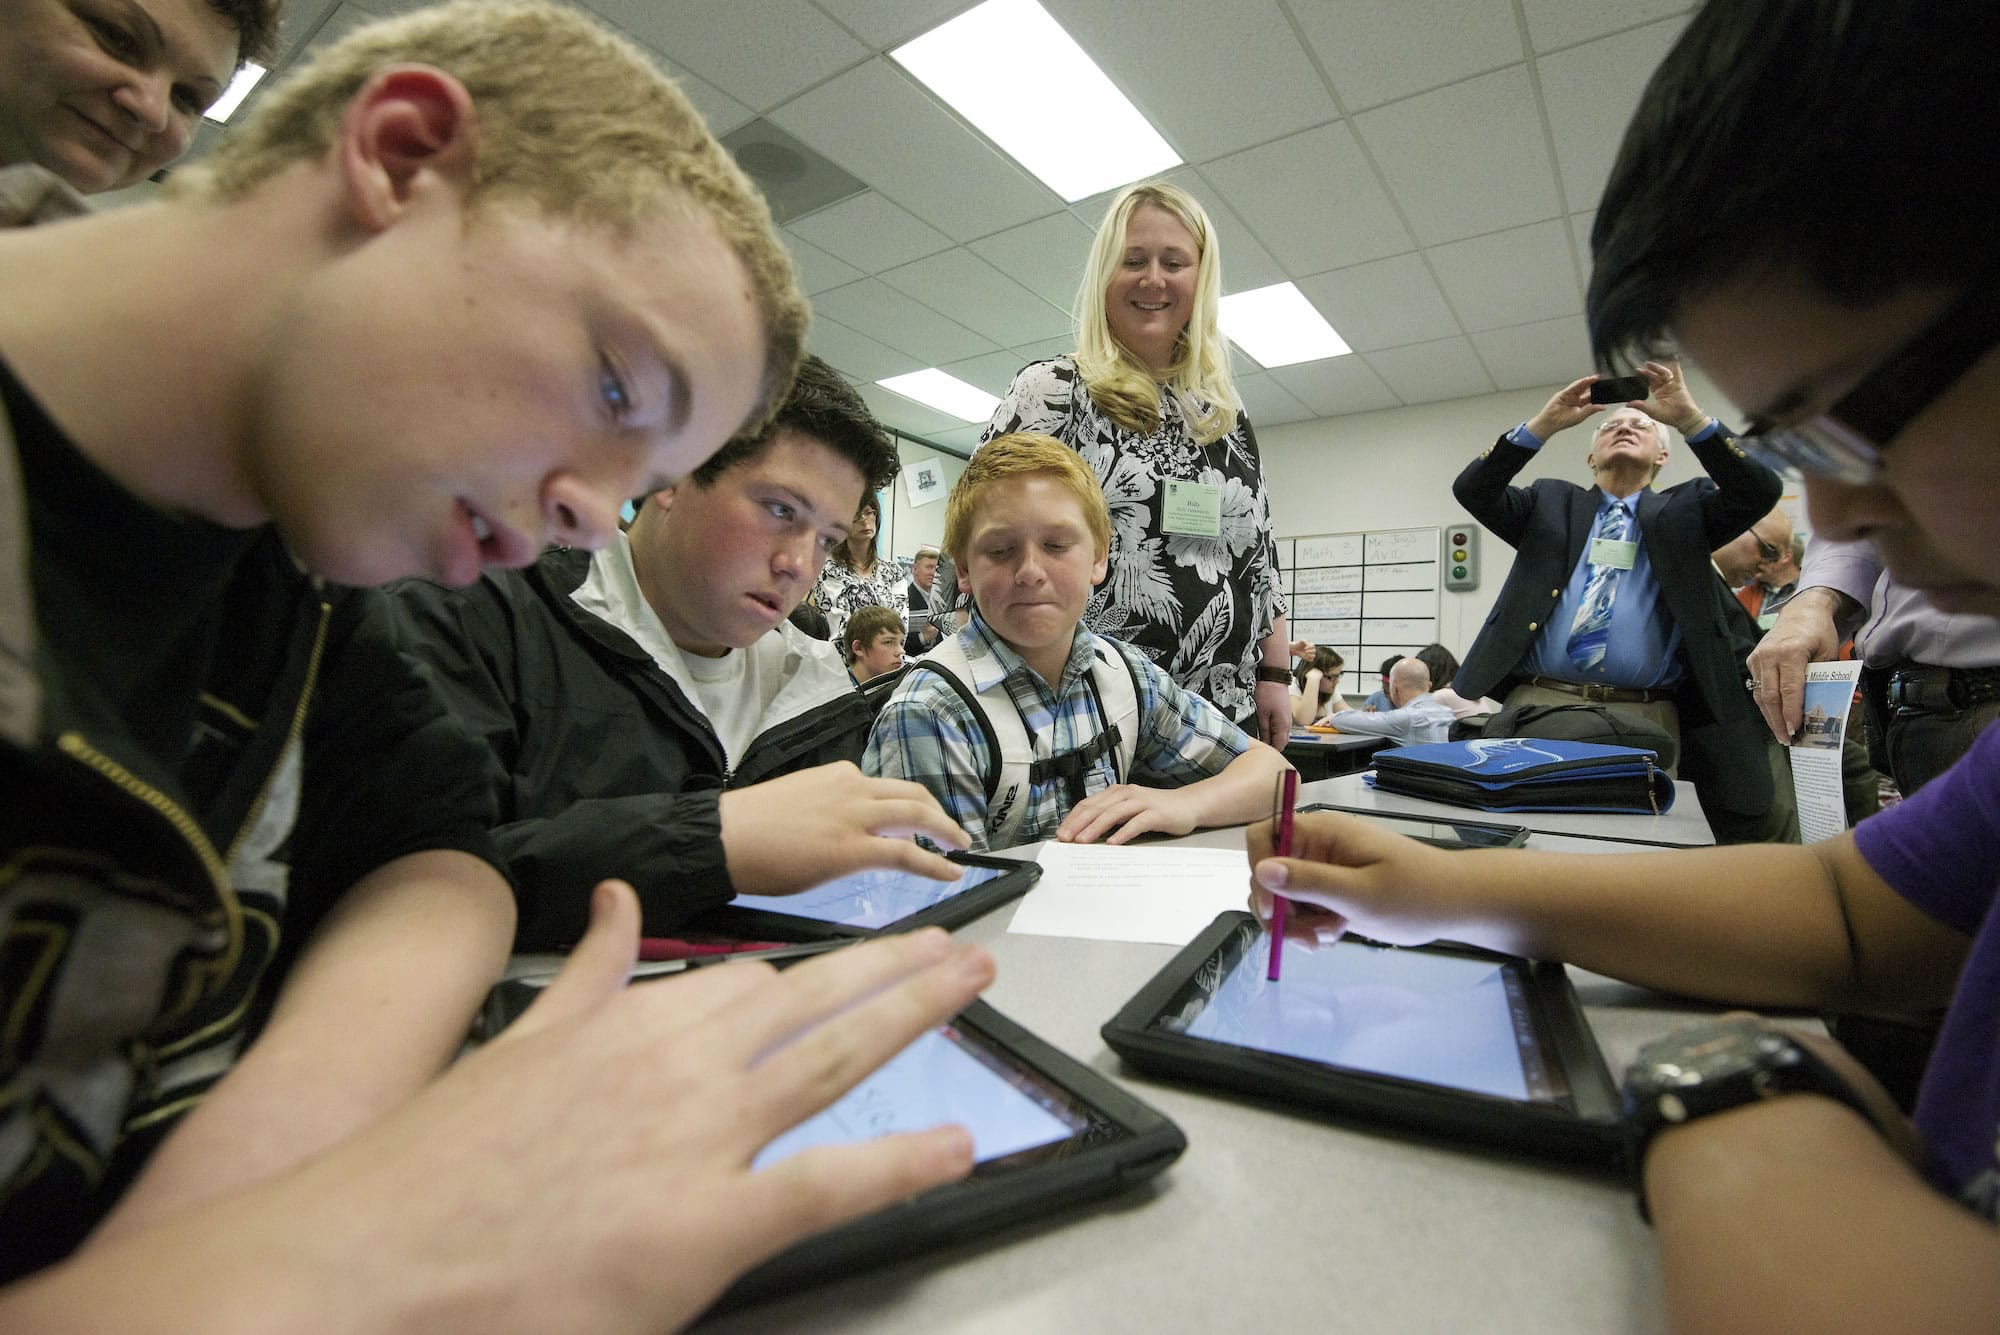 Tyler Aland, 14, from left, Jesse Schneider, 14, Teryn Siebers, 13, and Daniel Perez, 13, use iPads to solve math equations at Discovery Middle School. In the background observing, center, is Holly Palmersheim, technology professional development at Cedar Rapids Community School District in Iowa.